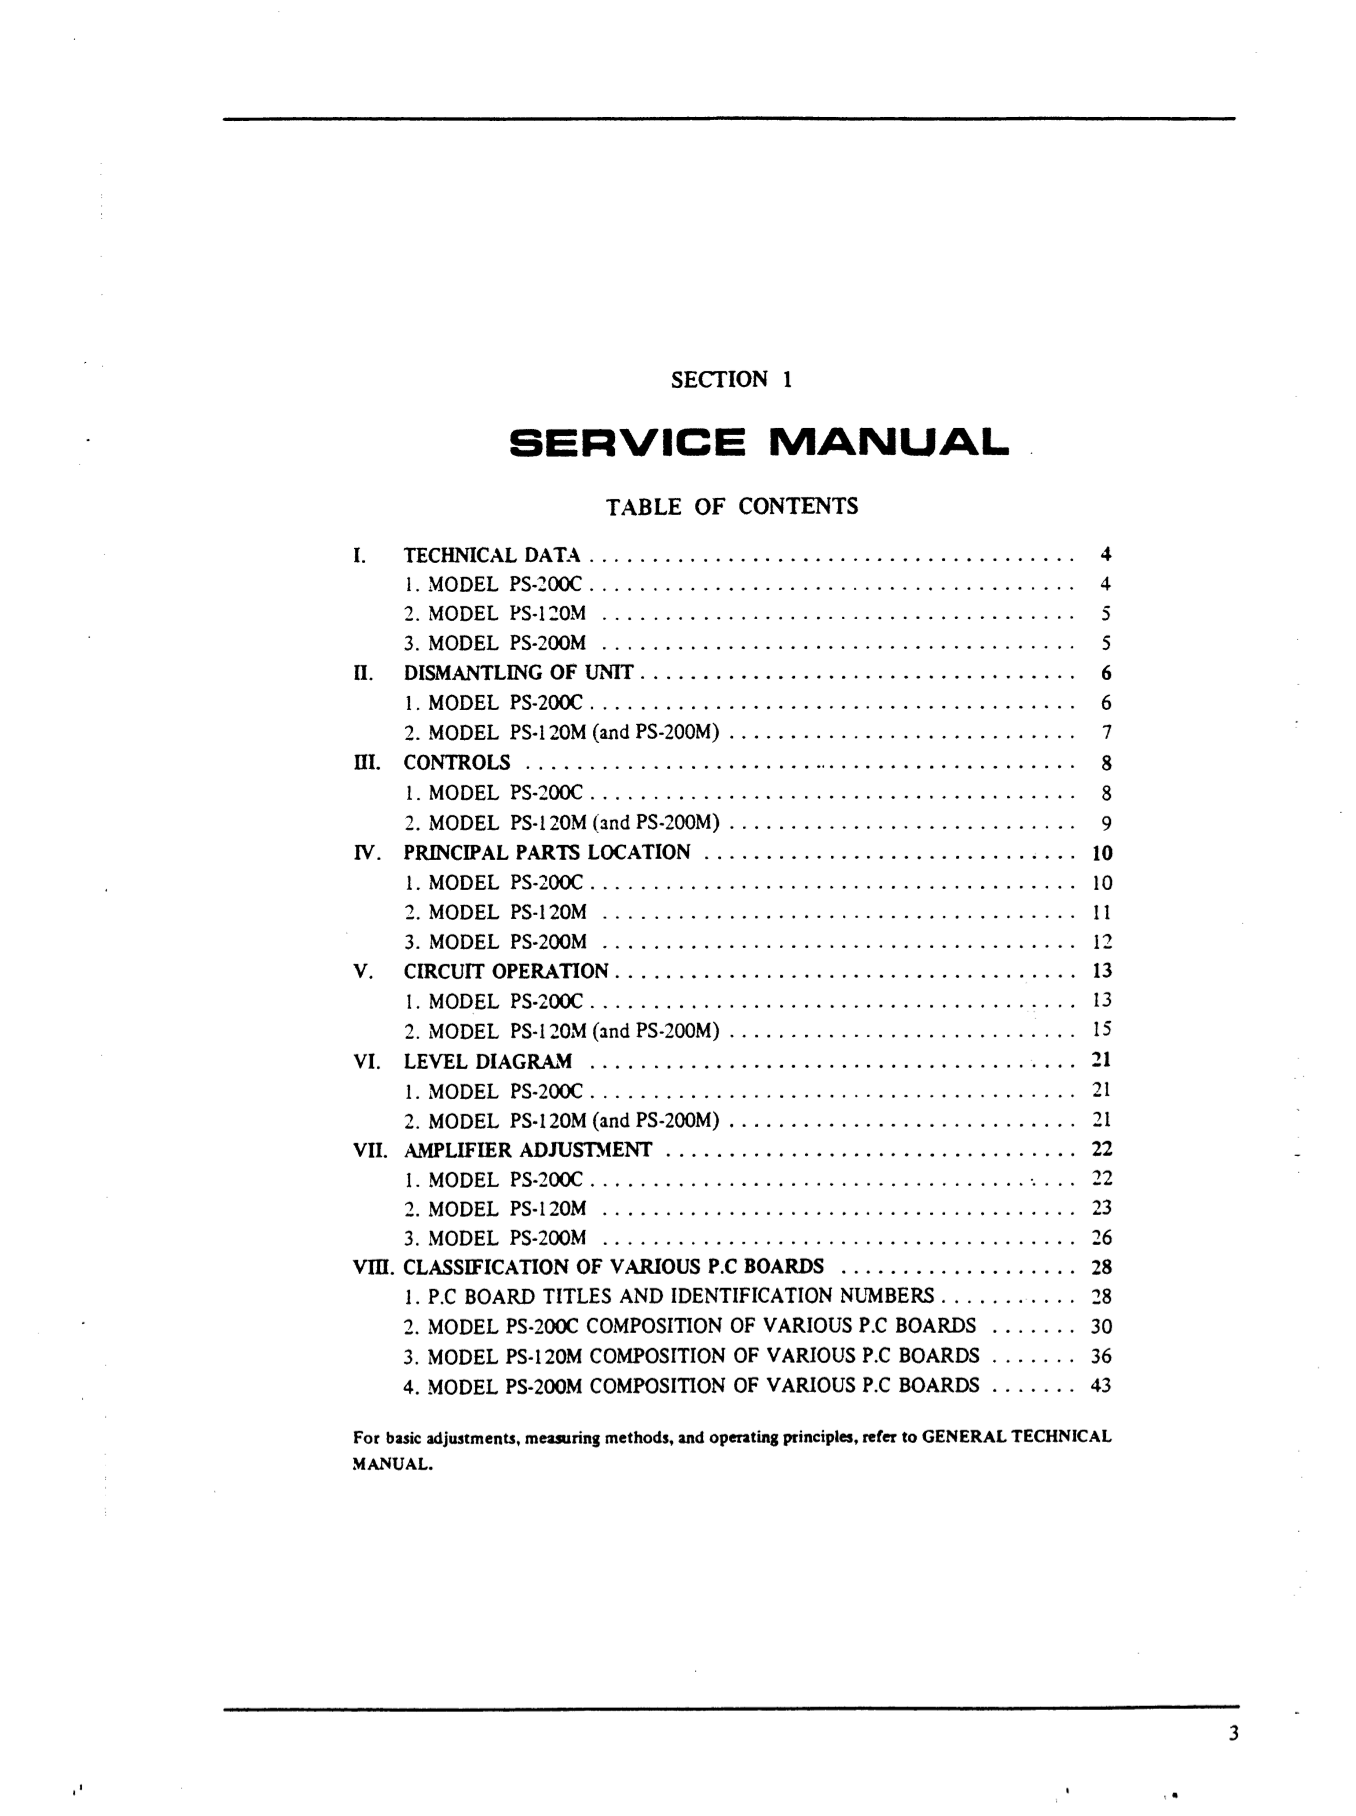 Akai PS-120N, PS-200C & PS-200M Stereo Power Amplifier Service Manual (Pages: 88)